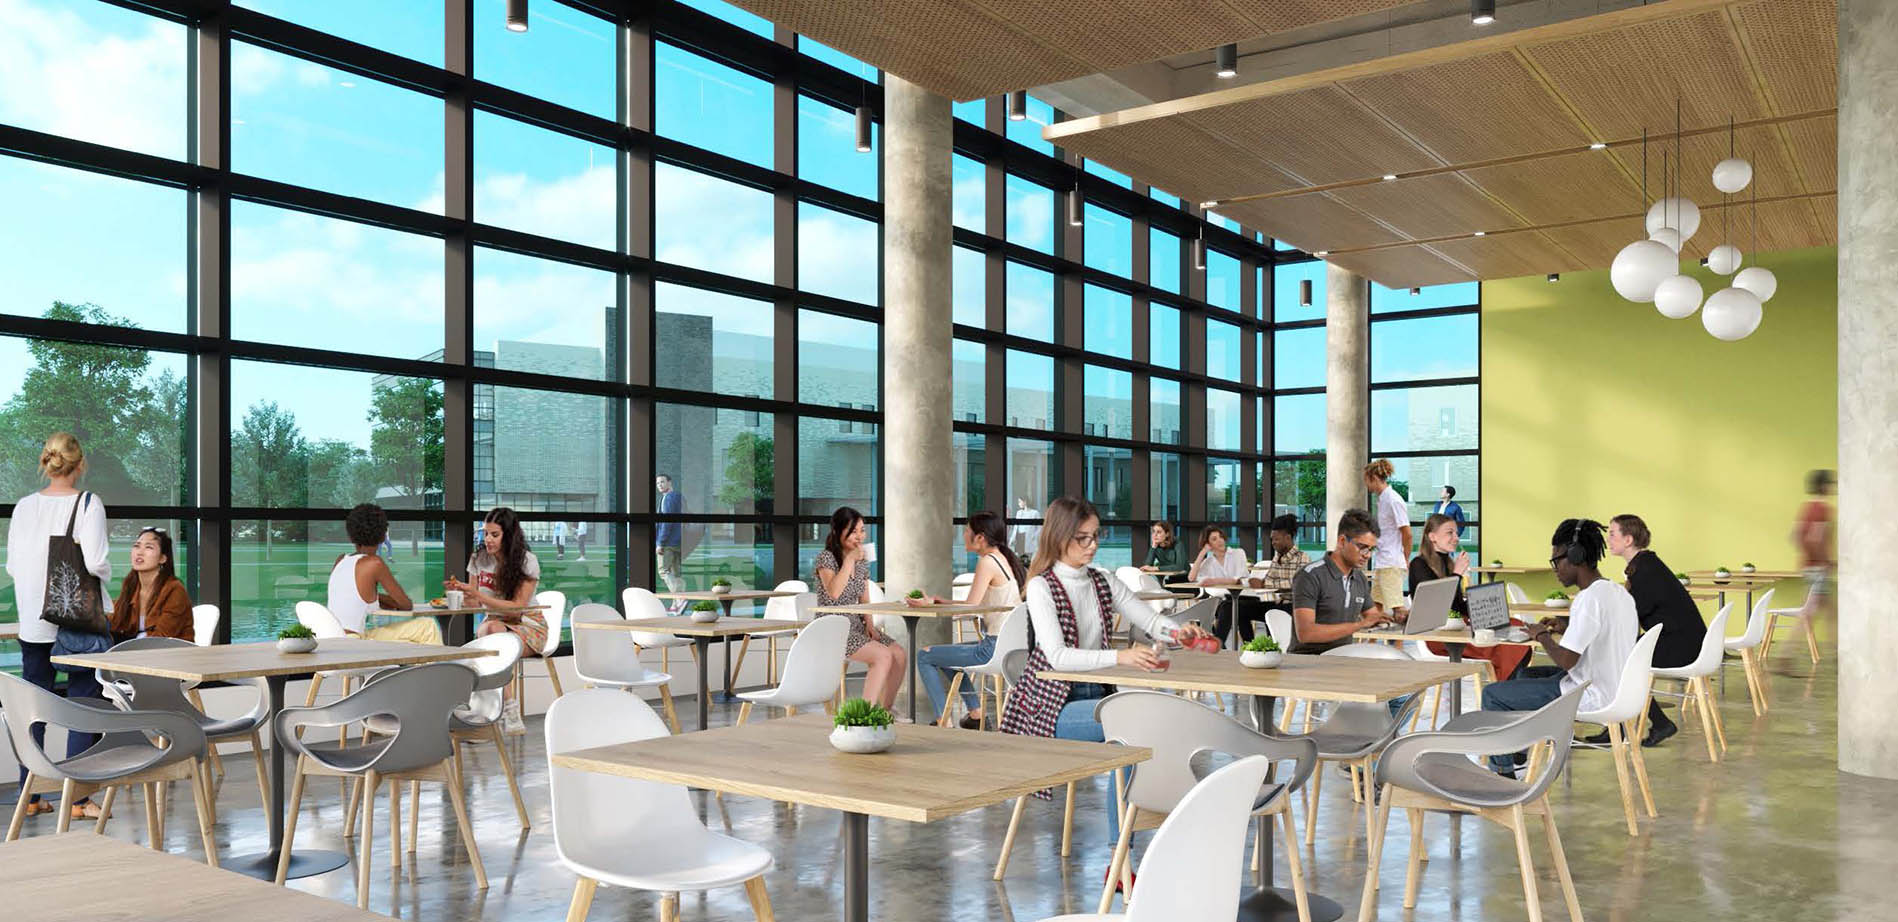 Architect rendering of Oso Creek Campus dining area